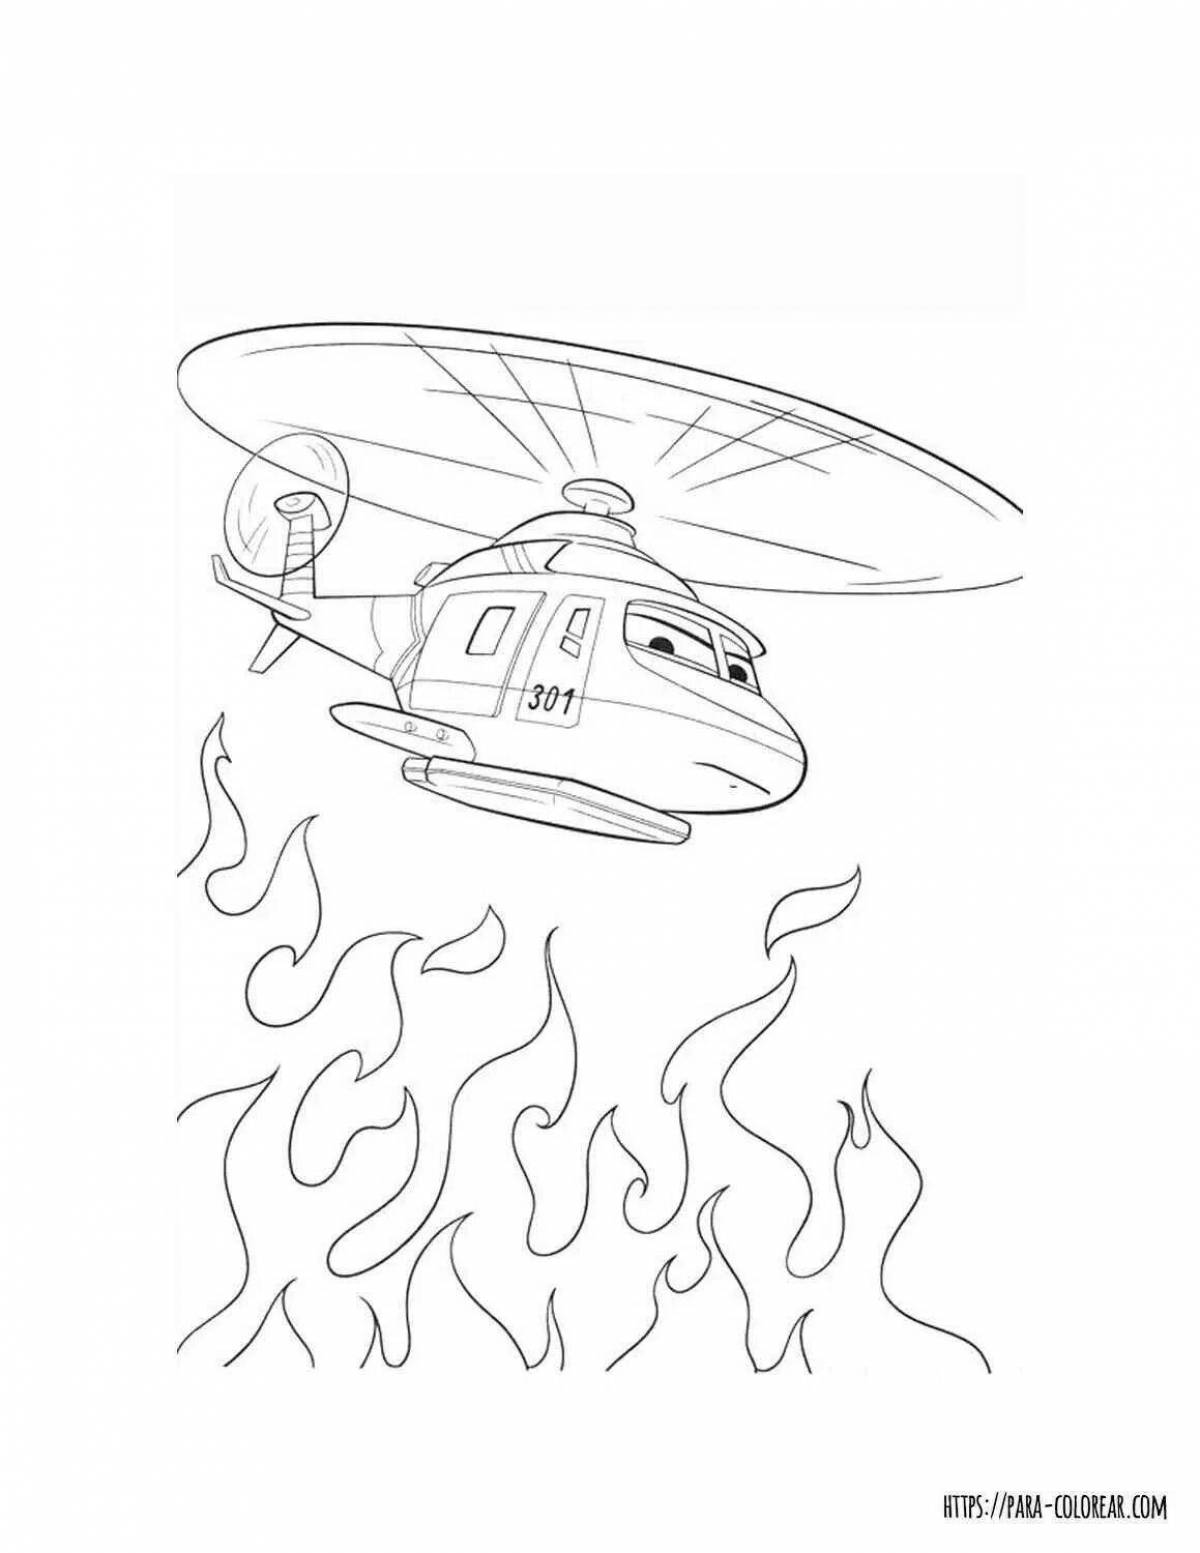 Wonderful rescue helicopter coloring book